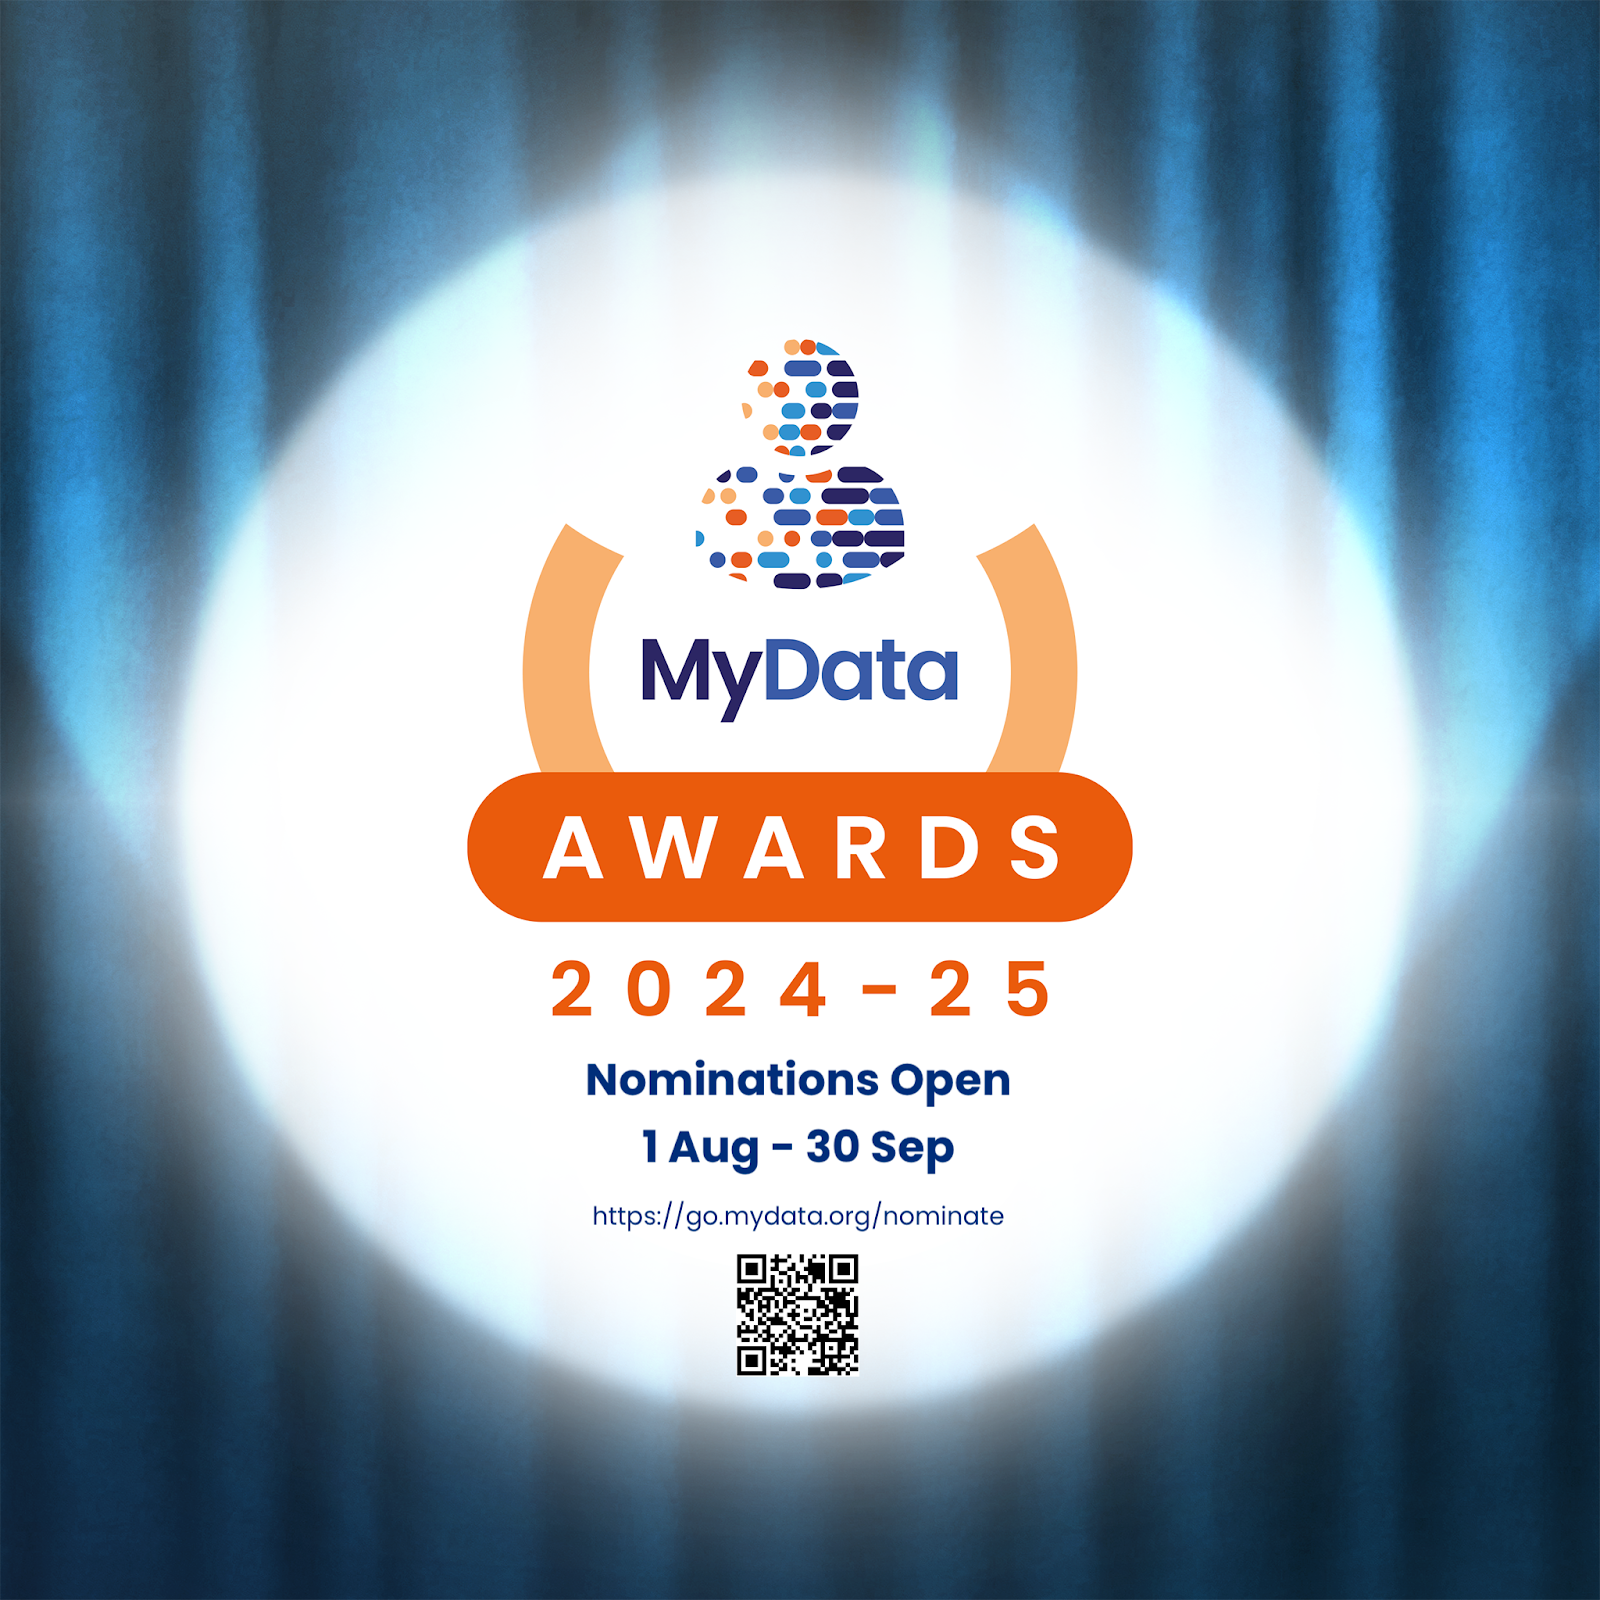 The MyData Awards 2024 – 2025 are now open for nominations! 